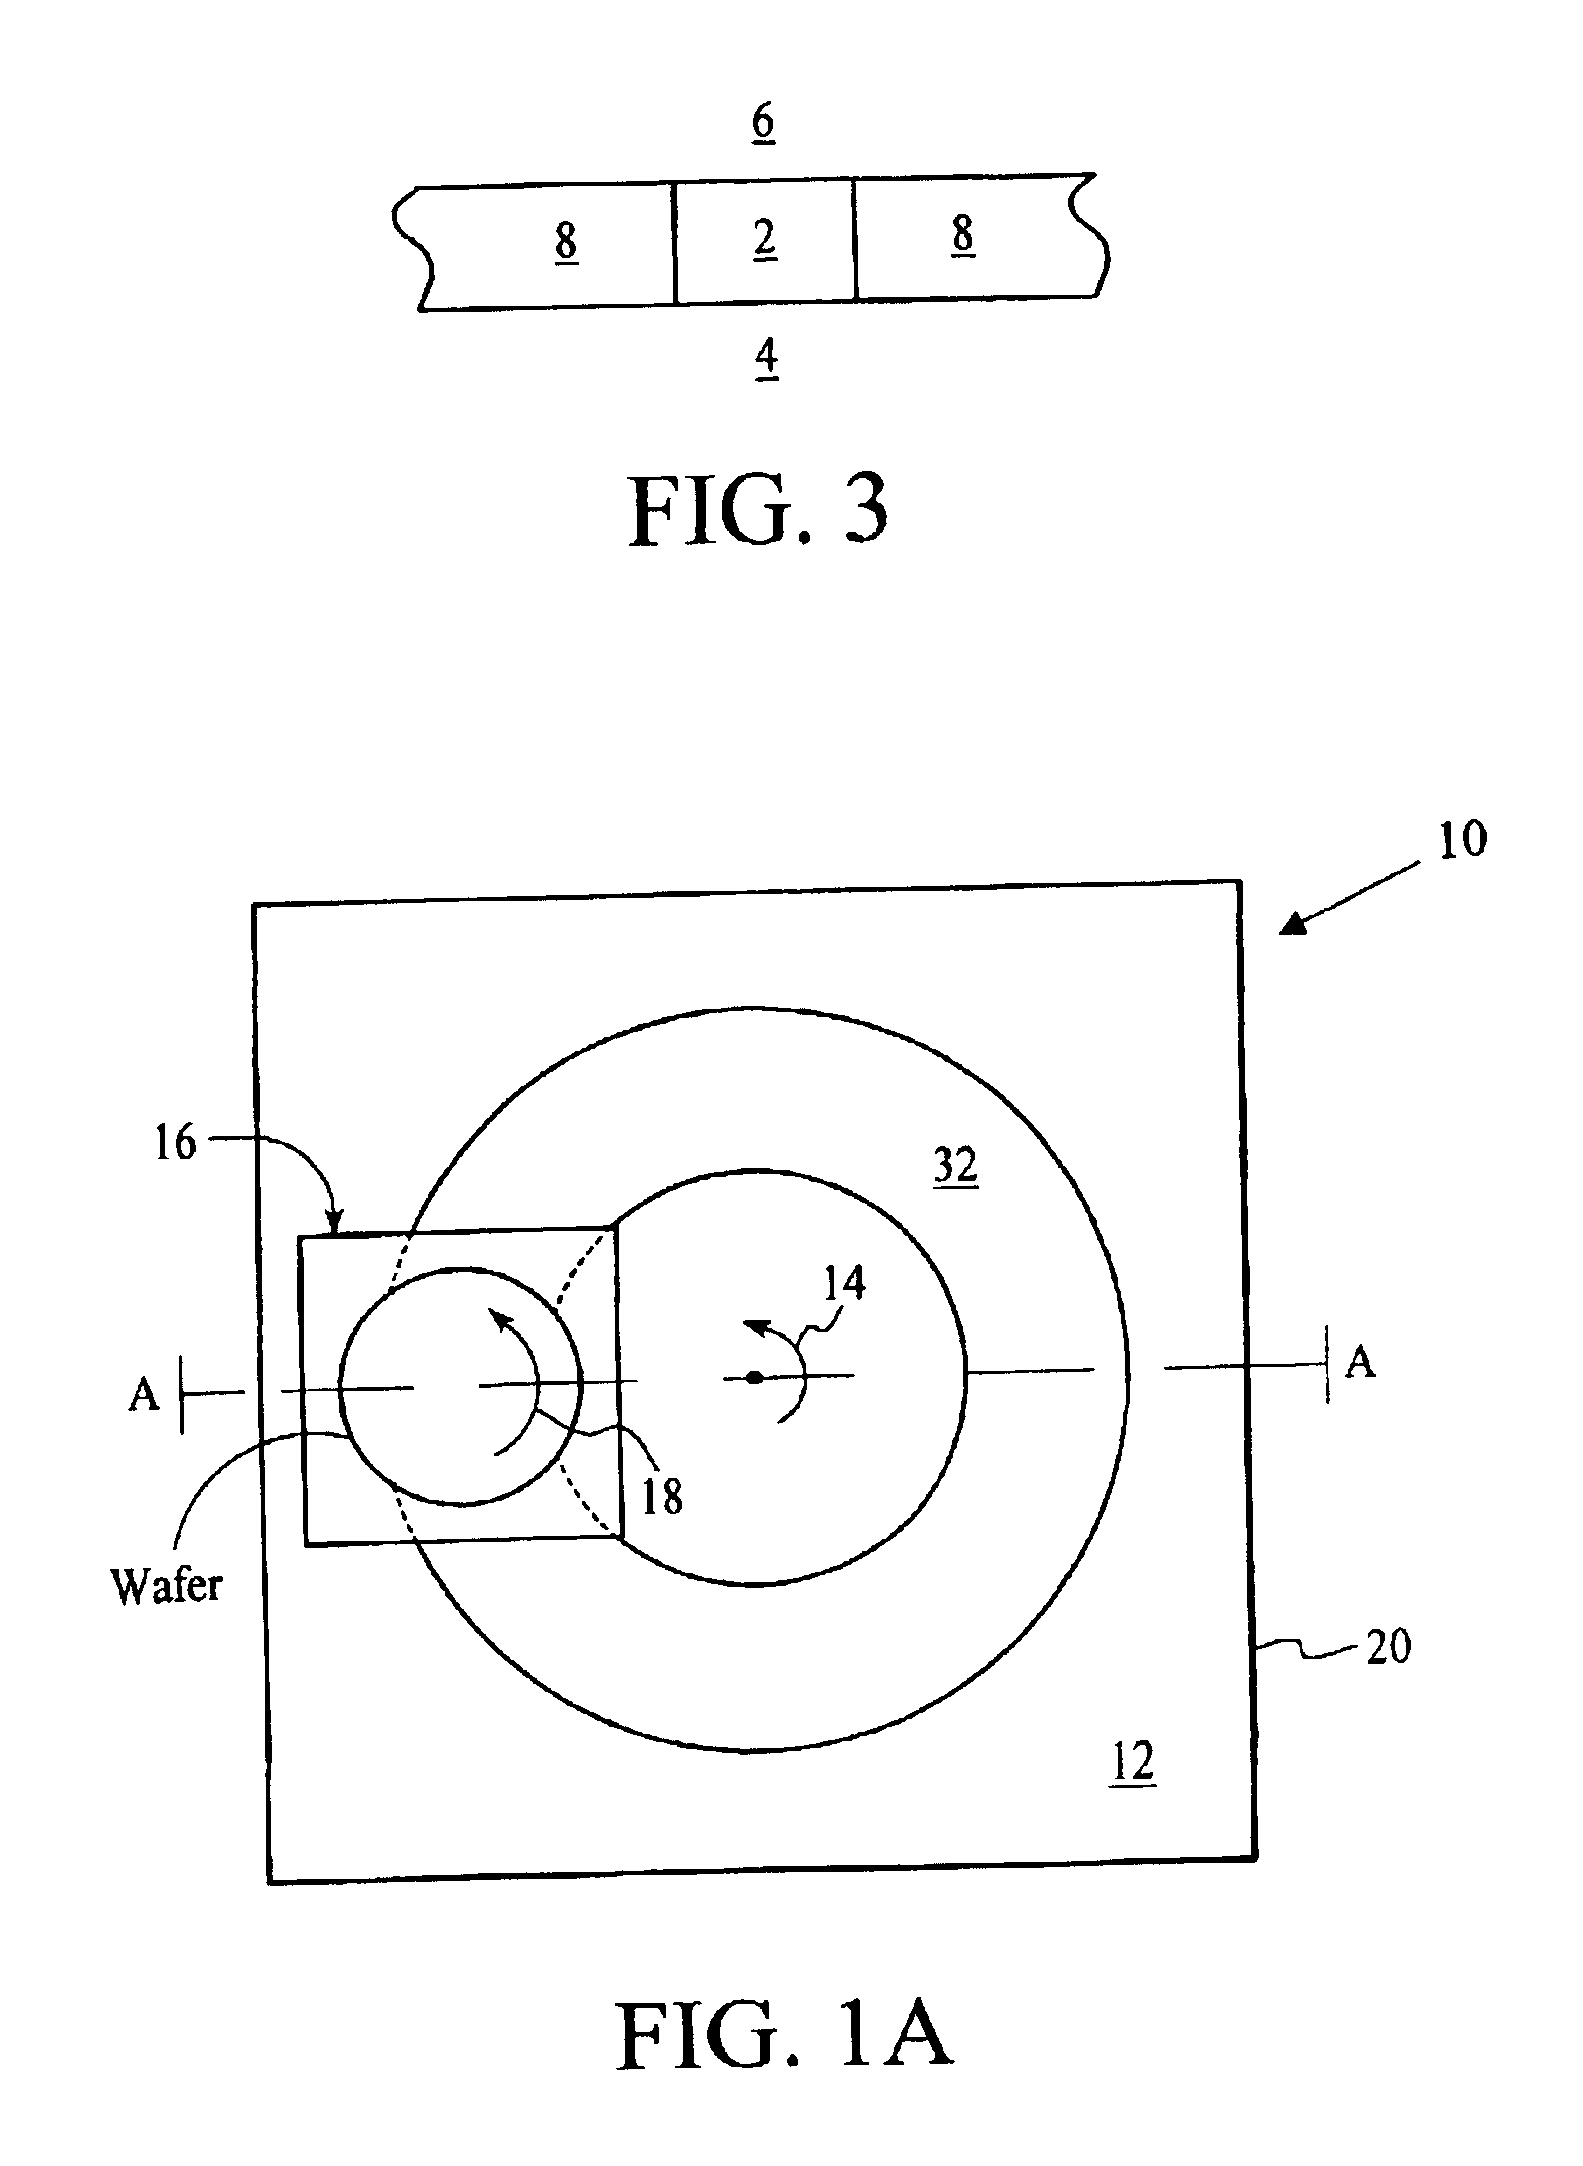 Method and apparatus for electro-chemical mechanical deposition